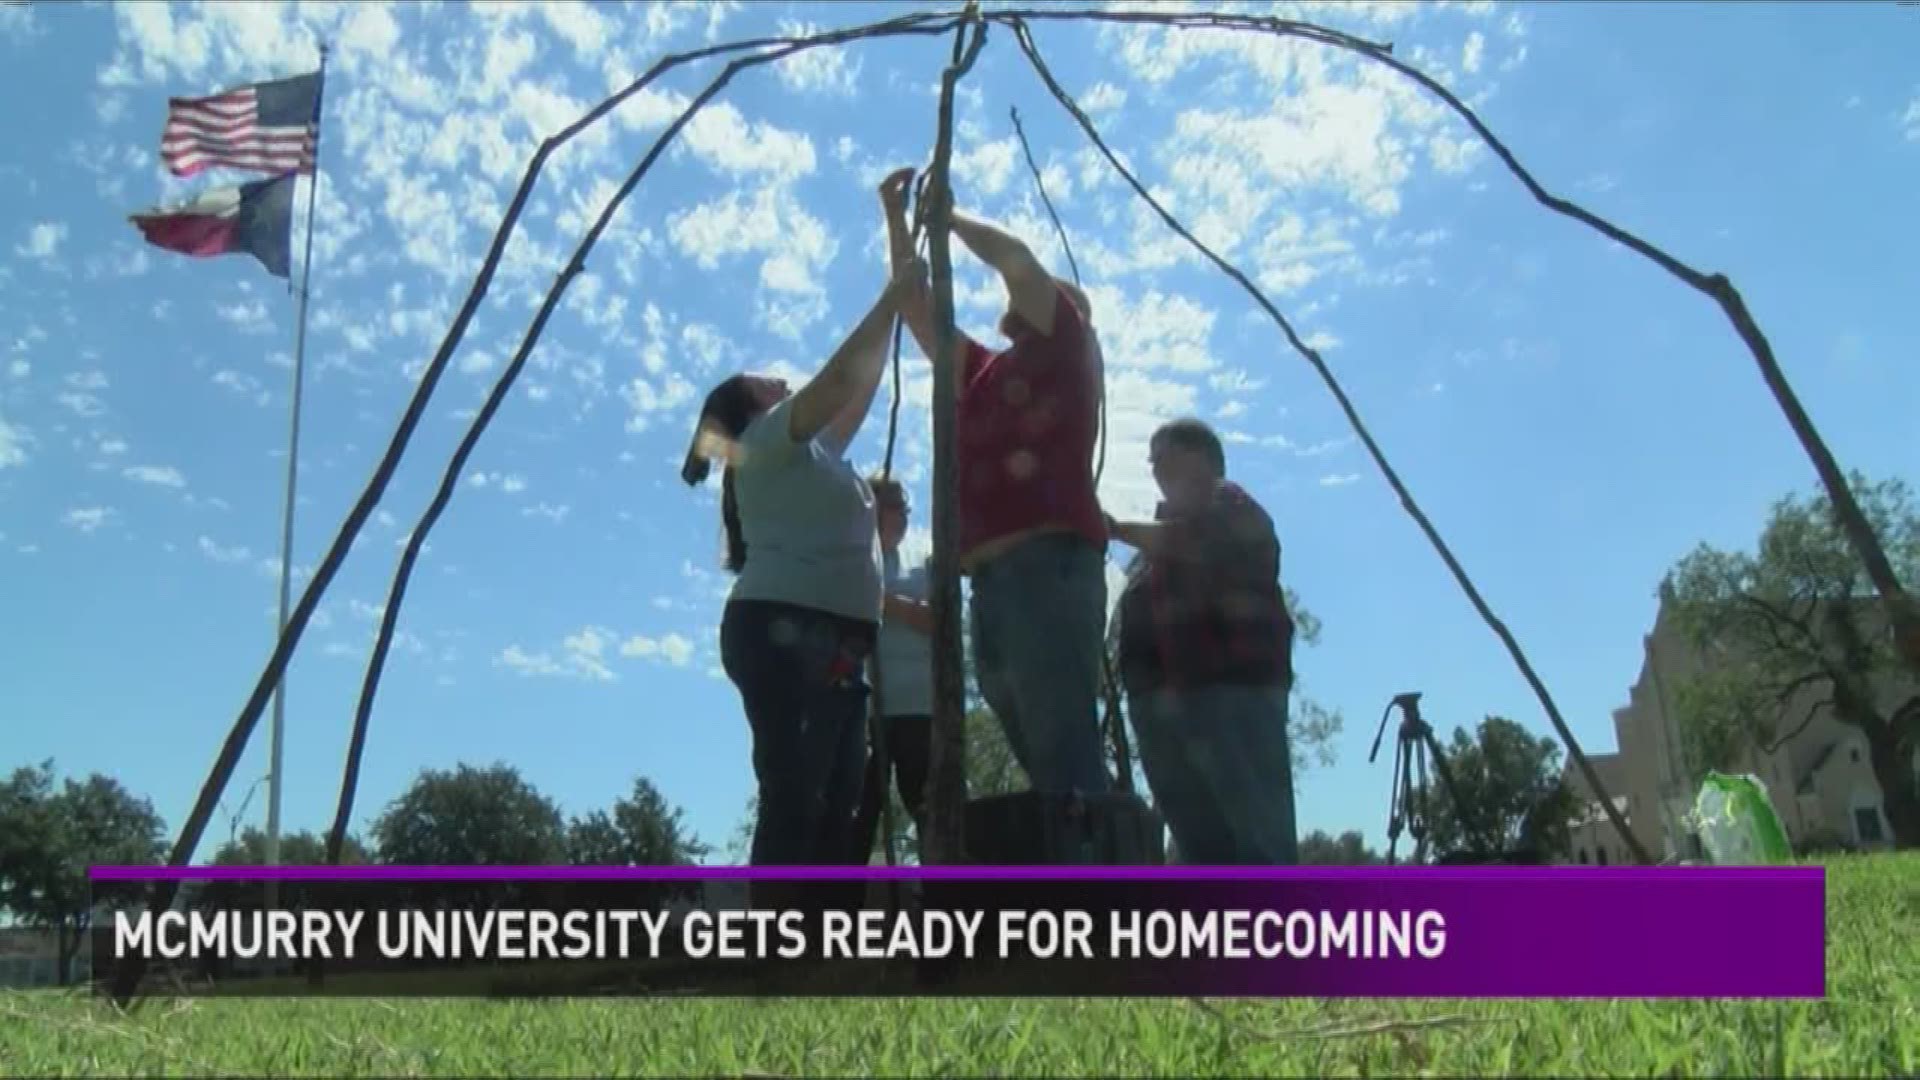 McMurry University Gets Ready for